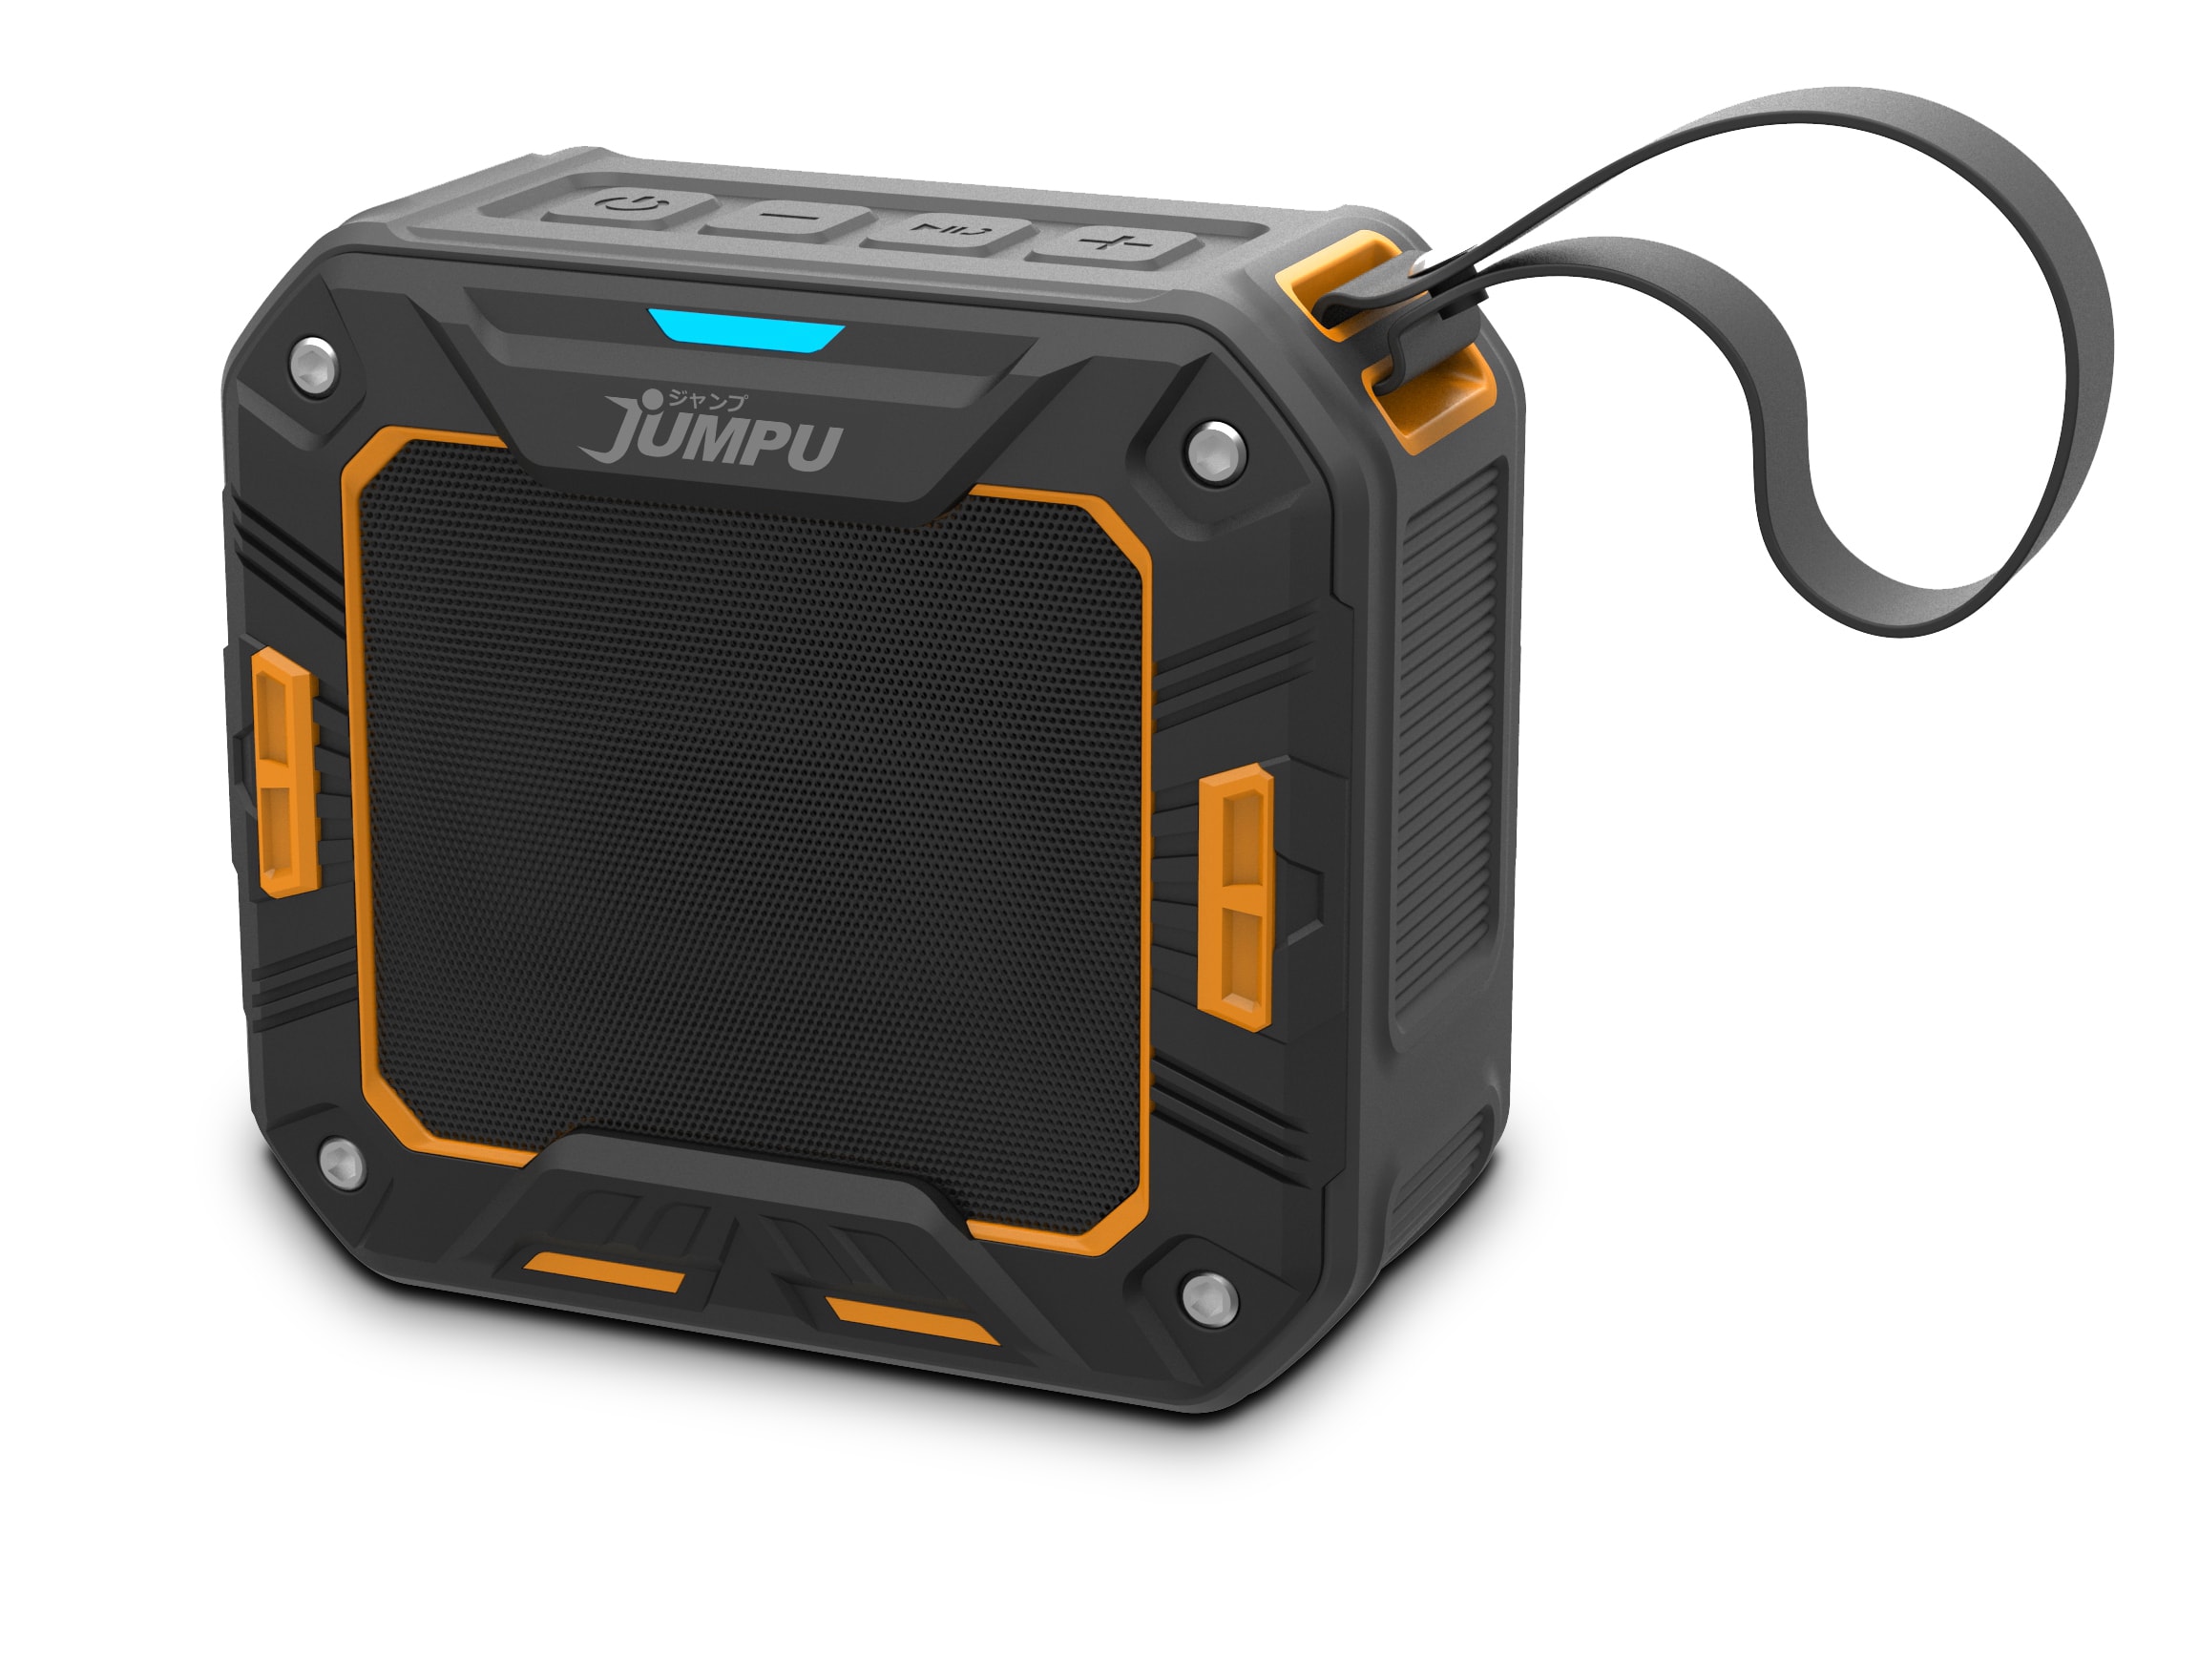 JUMPU’s TSUYOI-S is an Affordable Wireless Speaker Built for Rugged Use